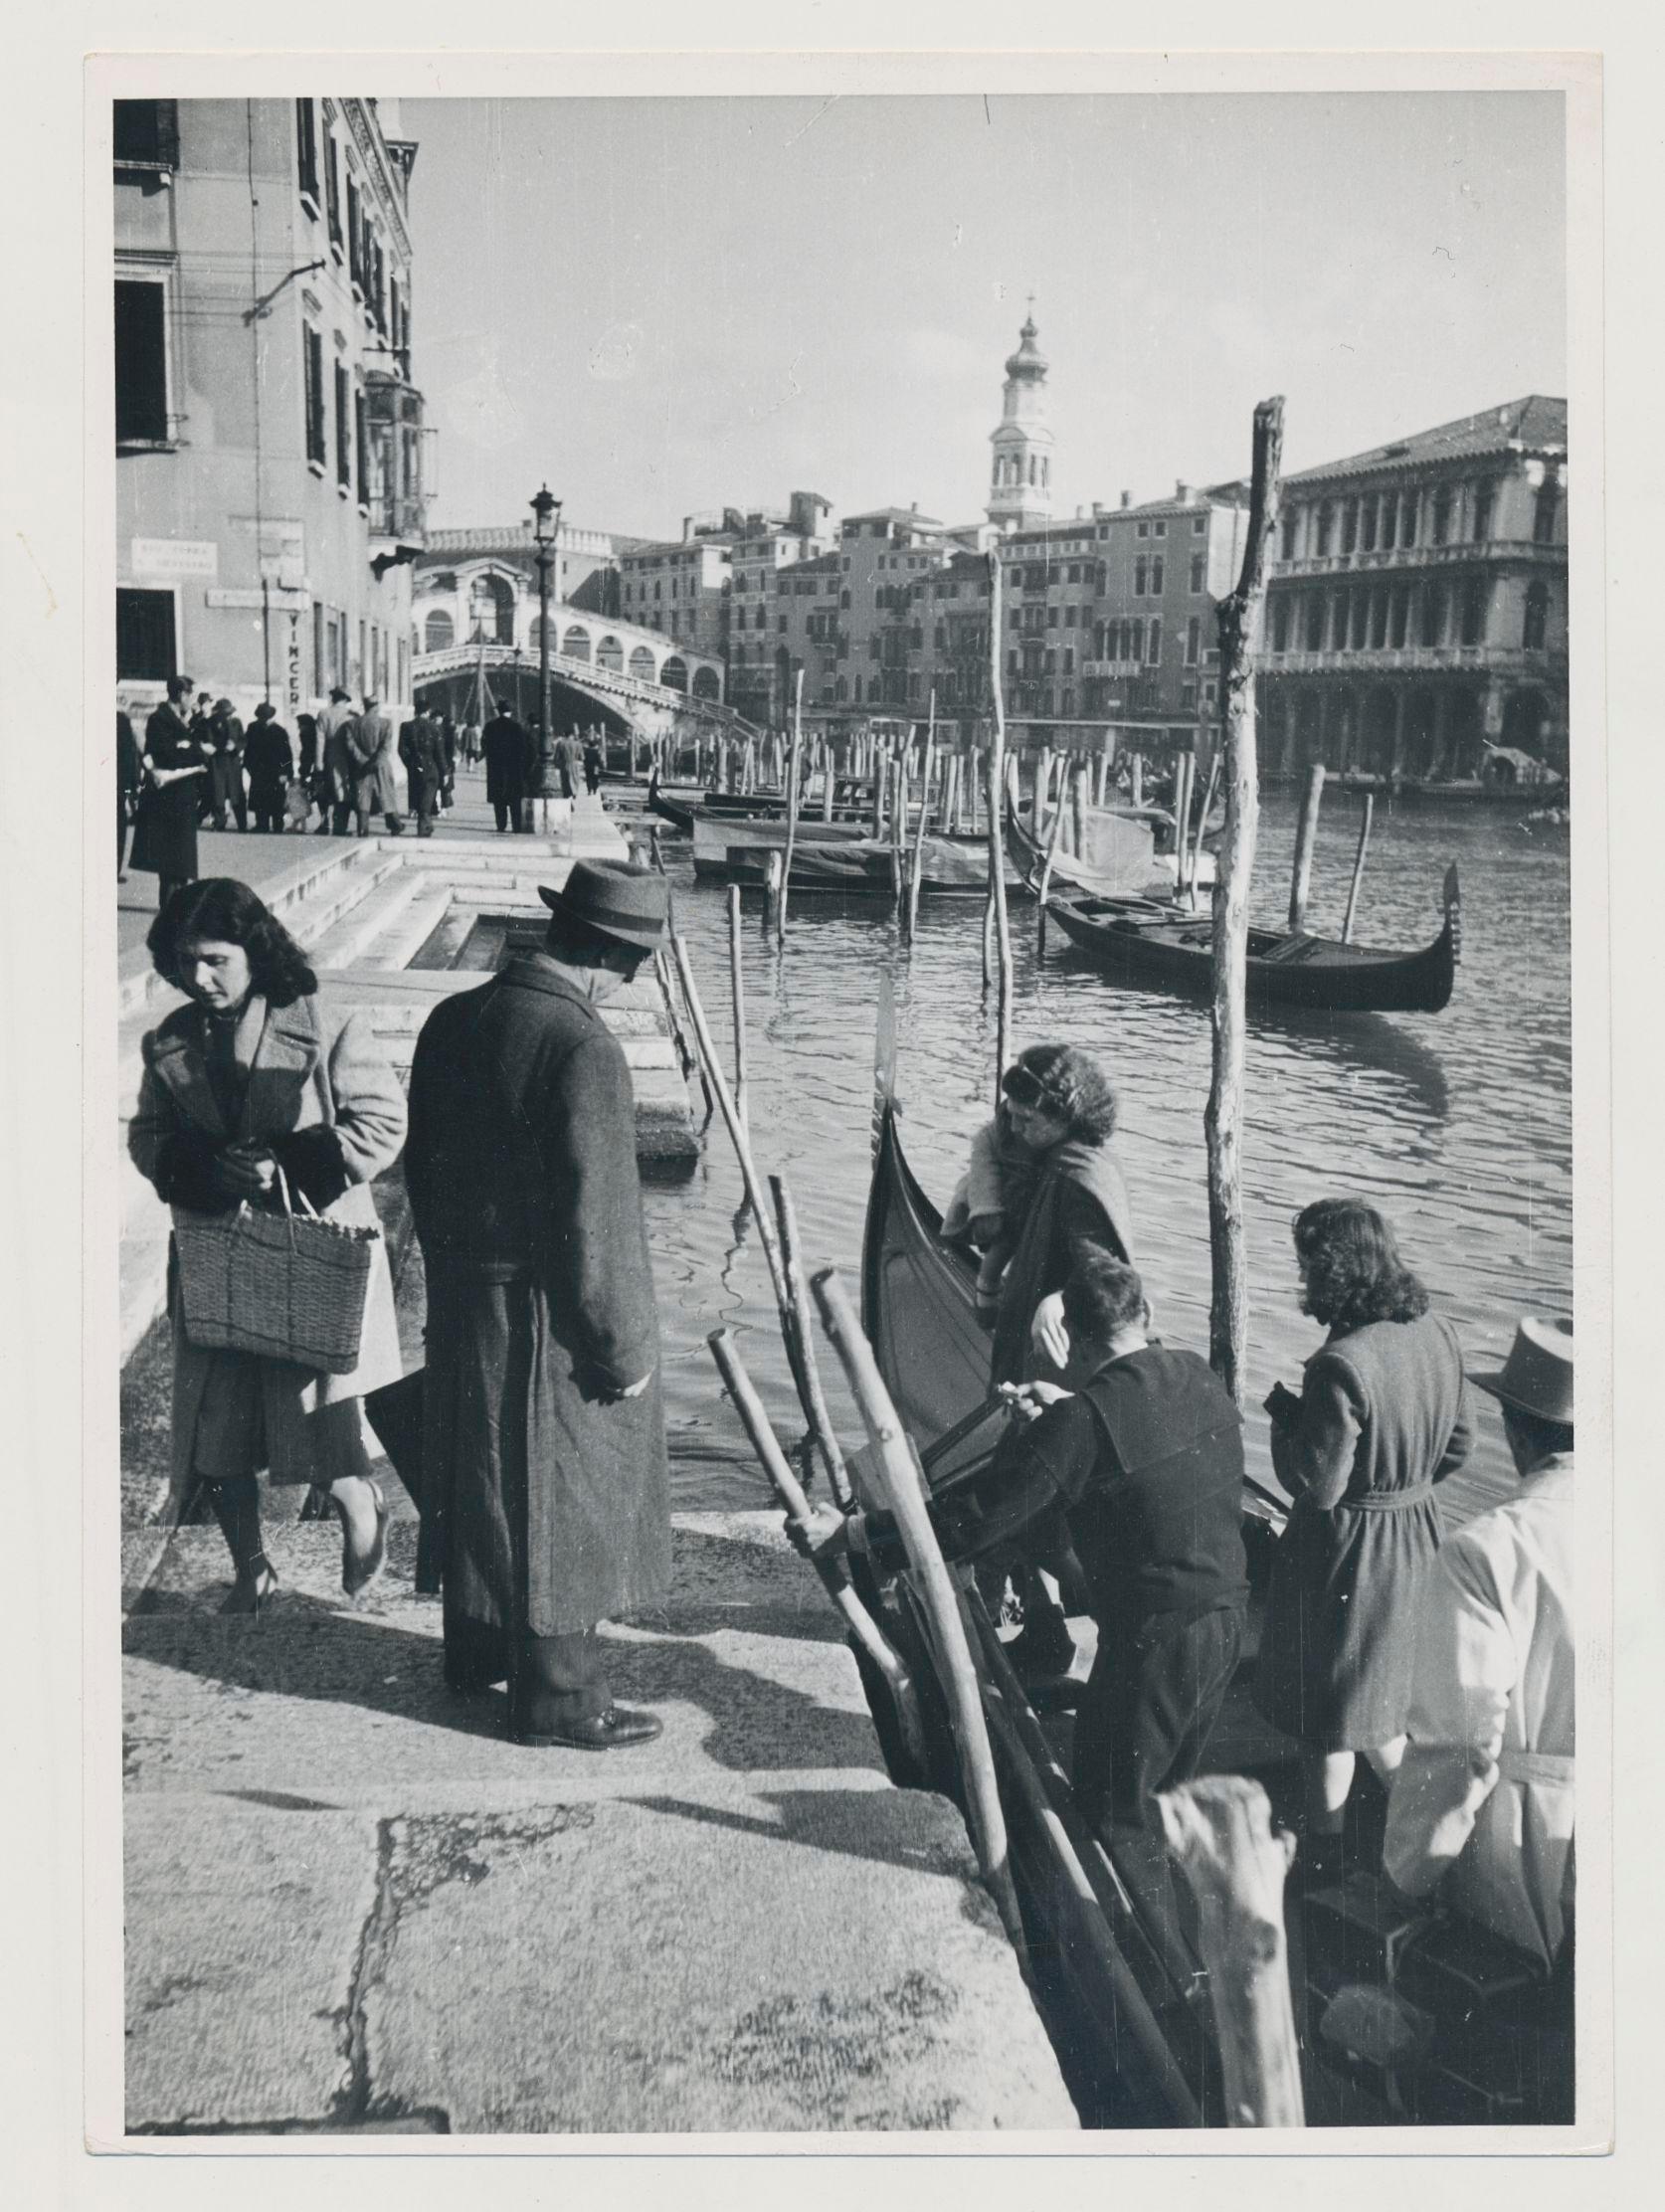 Erich Andres Black and White Photograph - Venice - Gondola on Water with people, Italy, 1950s, 17, 3 x 11, 5 cm